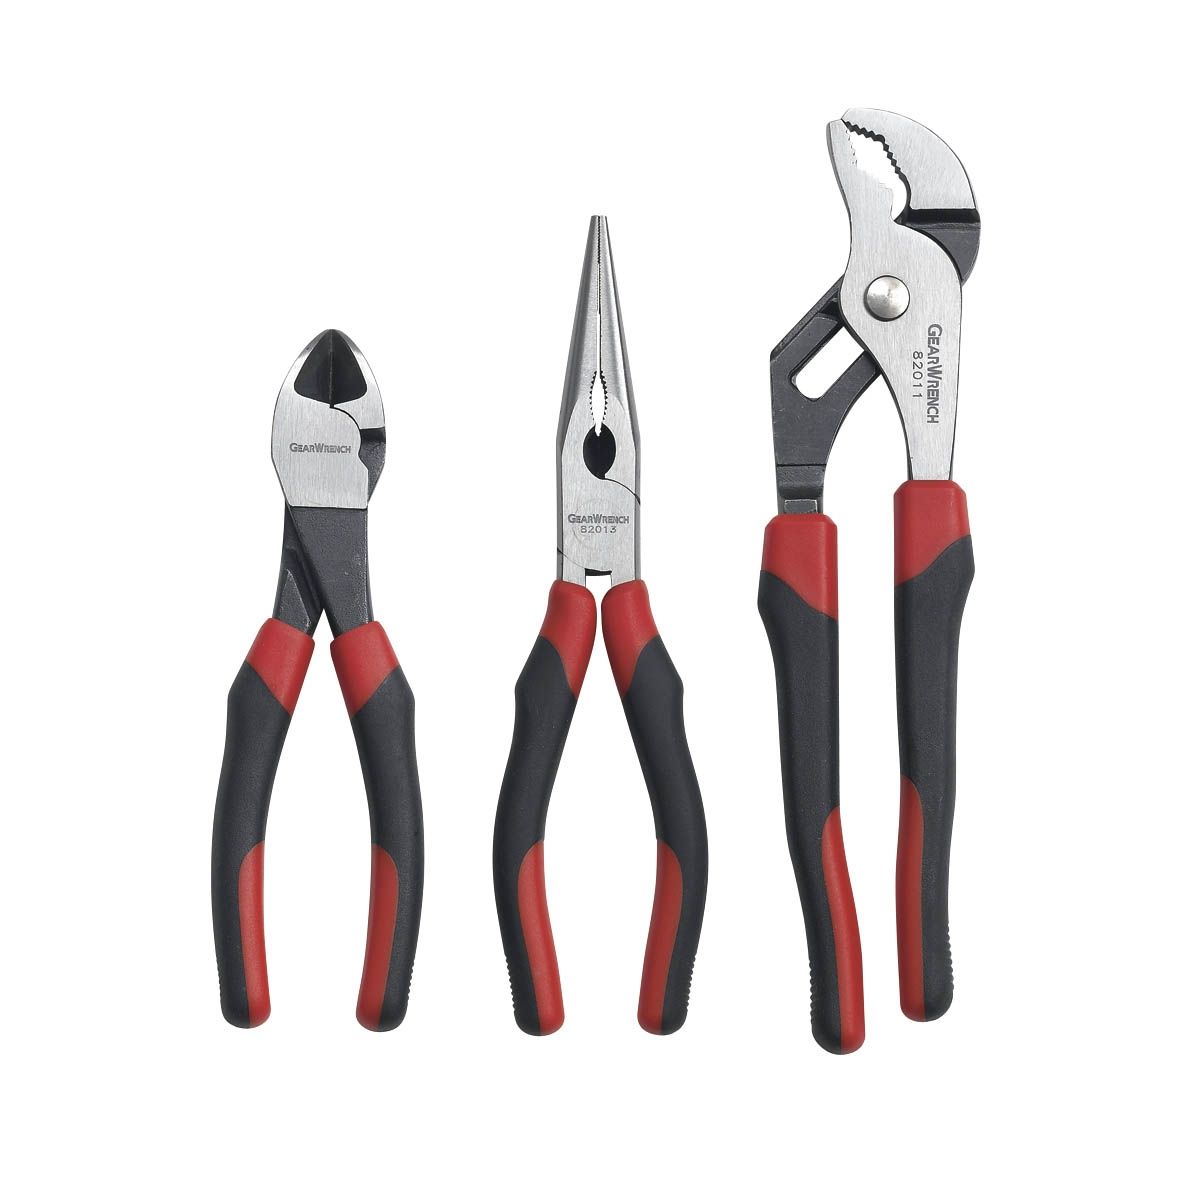 Mixed Pliers Set - Tongue and Groove, Diagonal Cutting, Long Nos